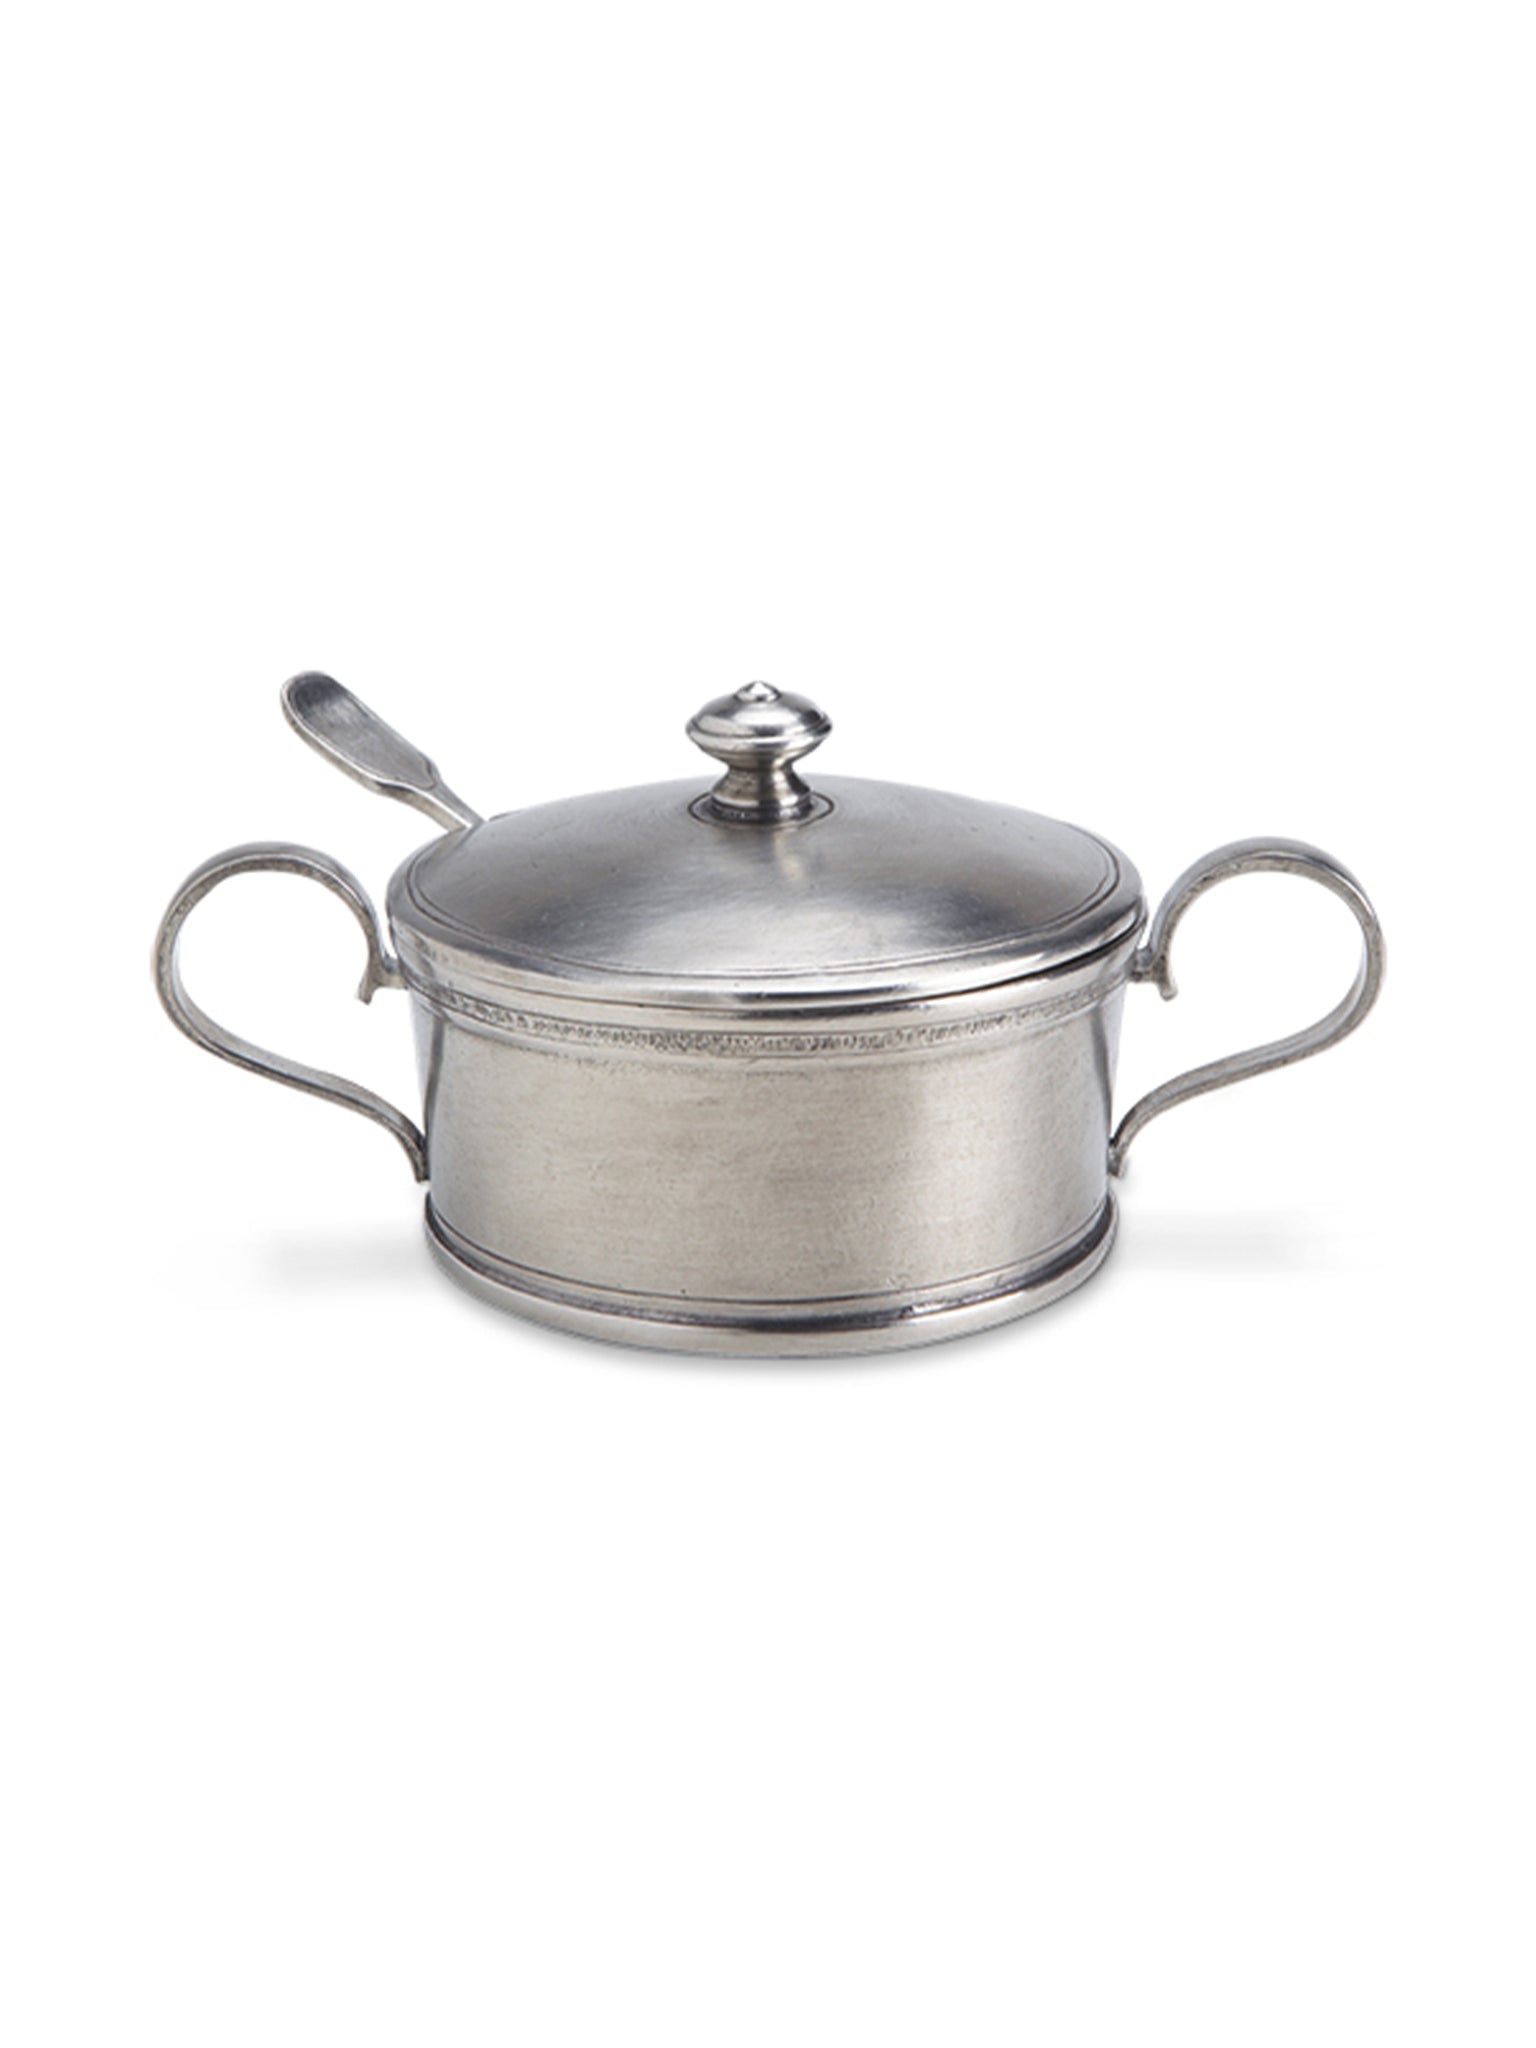 MATCH Pewter Sugar Bowl with Handles and Spoon Weston Table